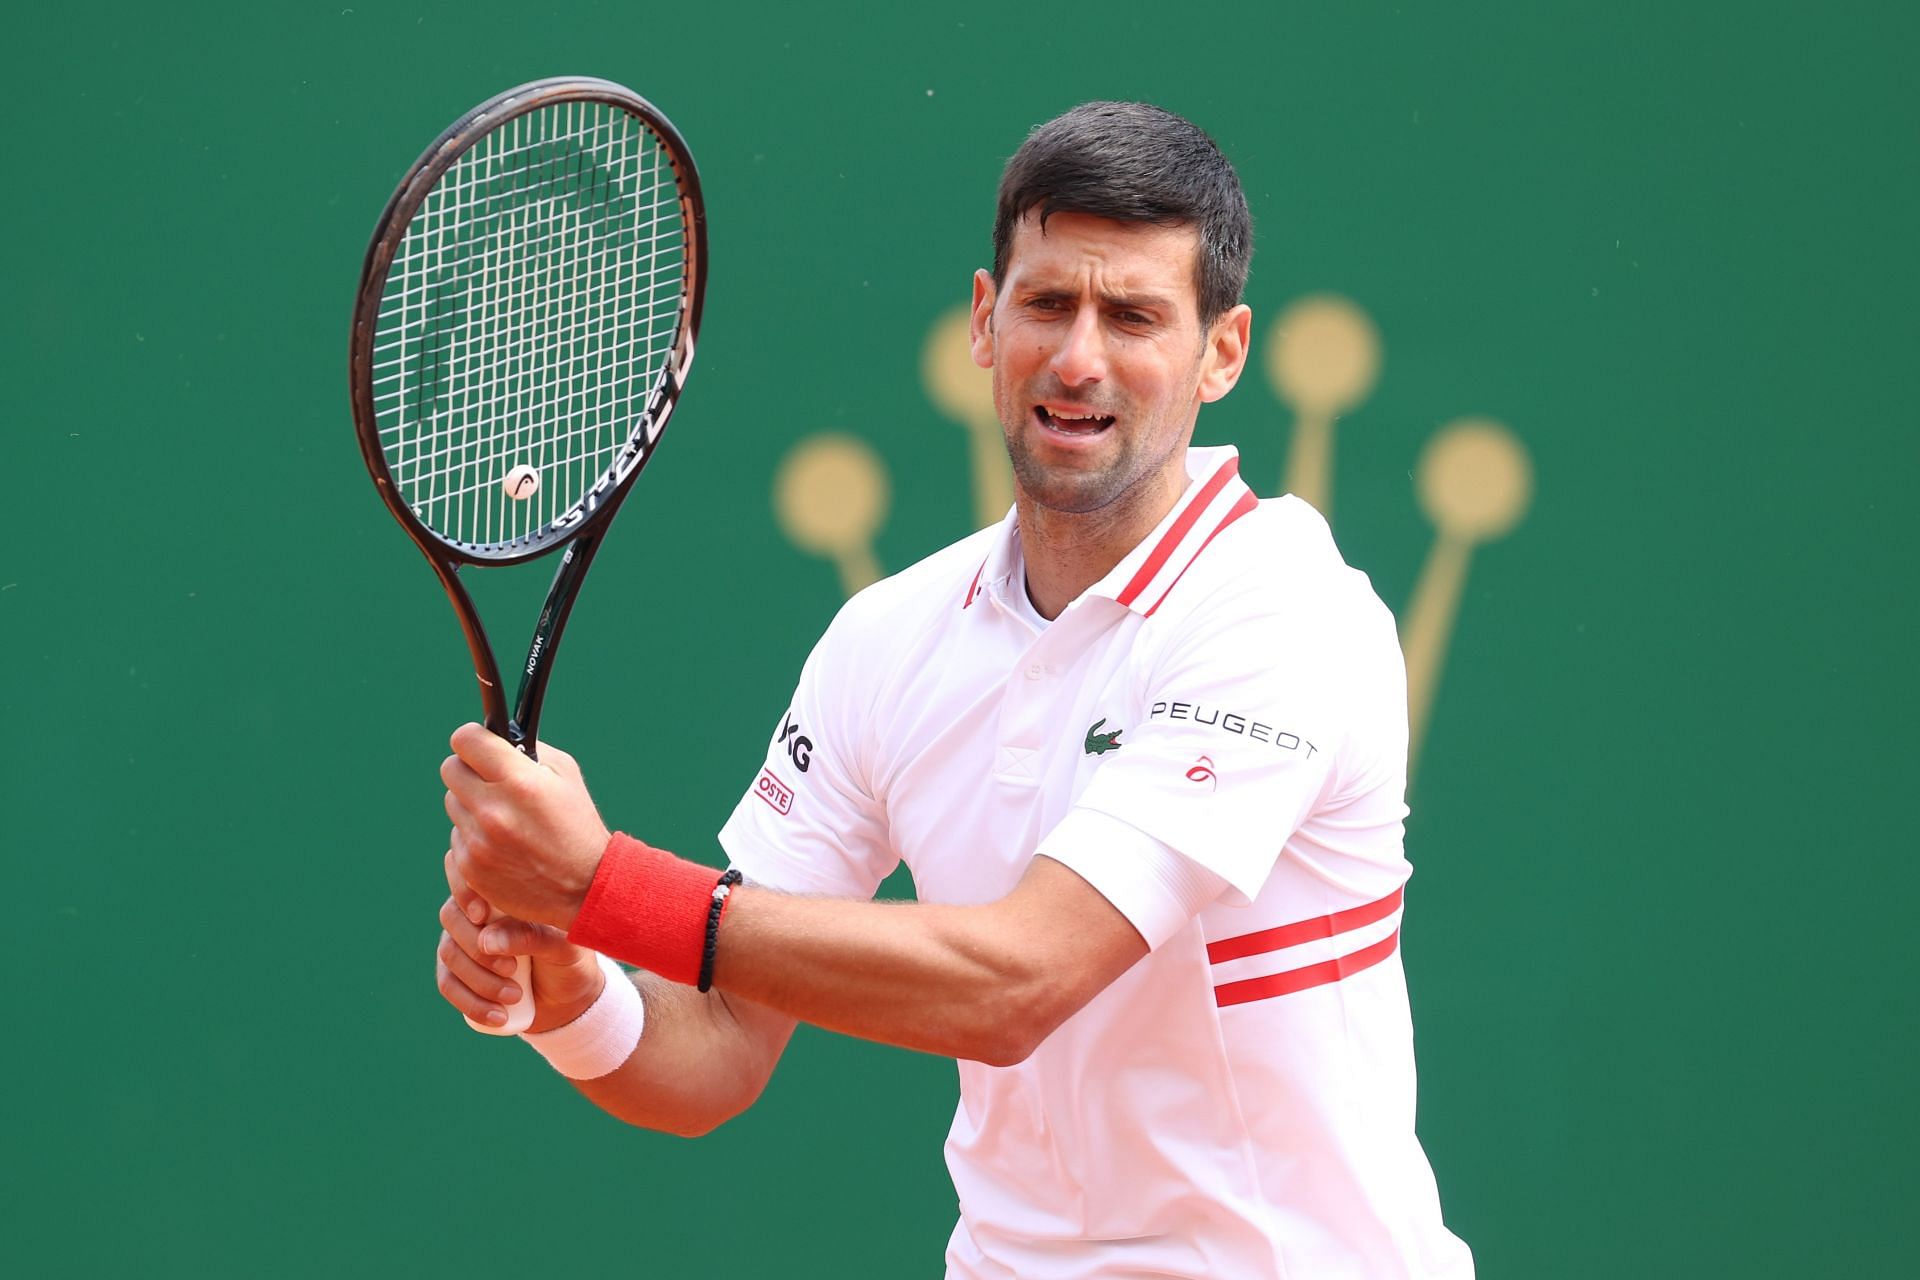 Novak Djokovic will play his second tournament of the year at the Monte-Carlo Masters